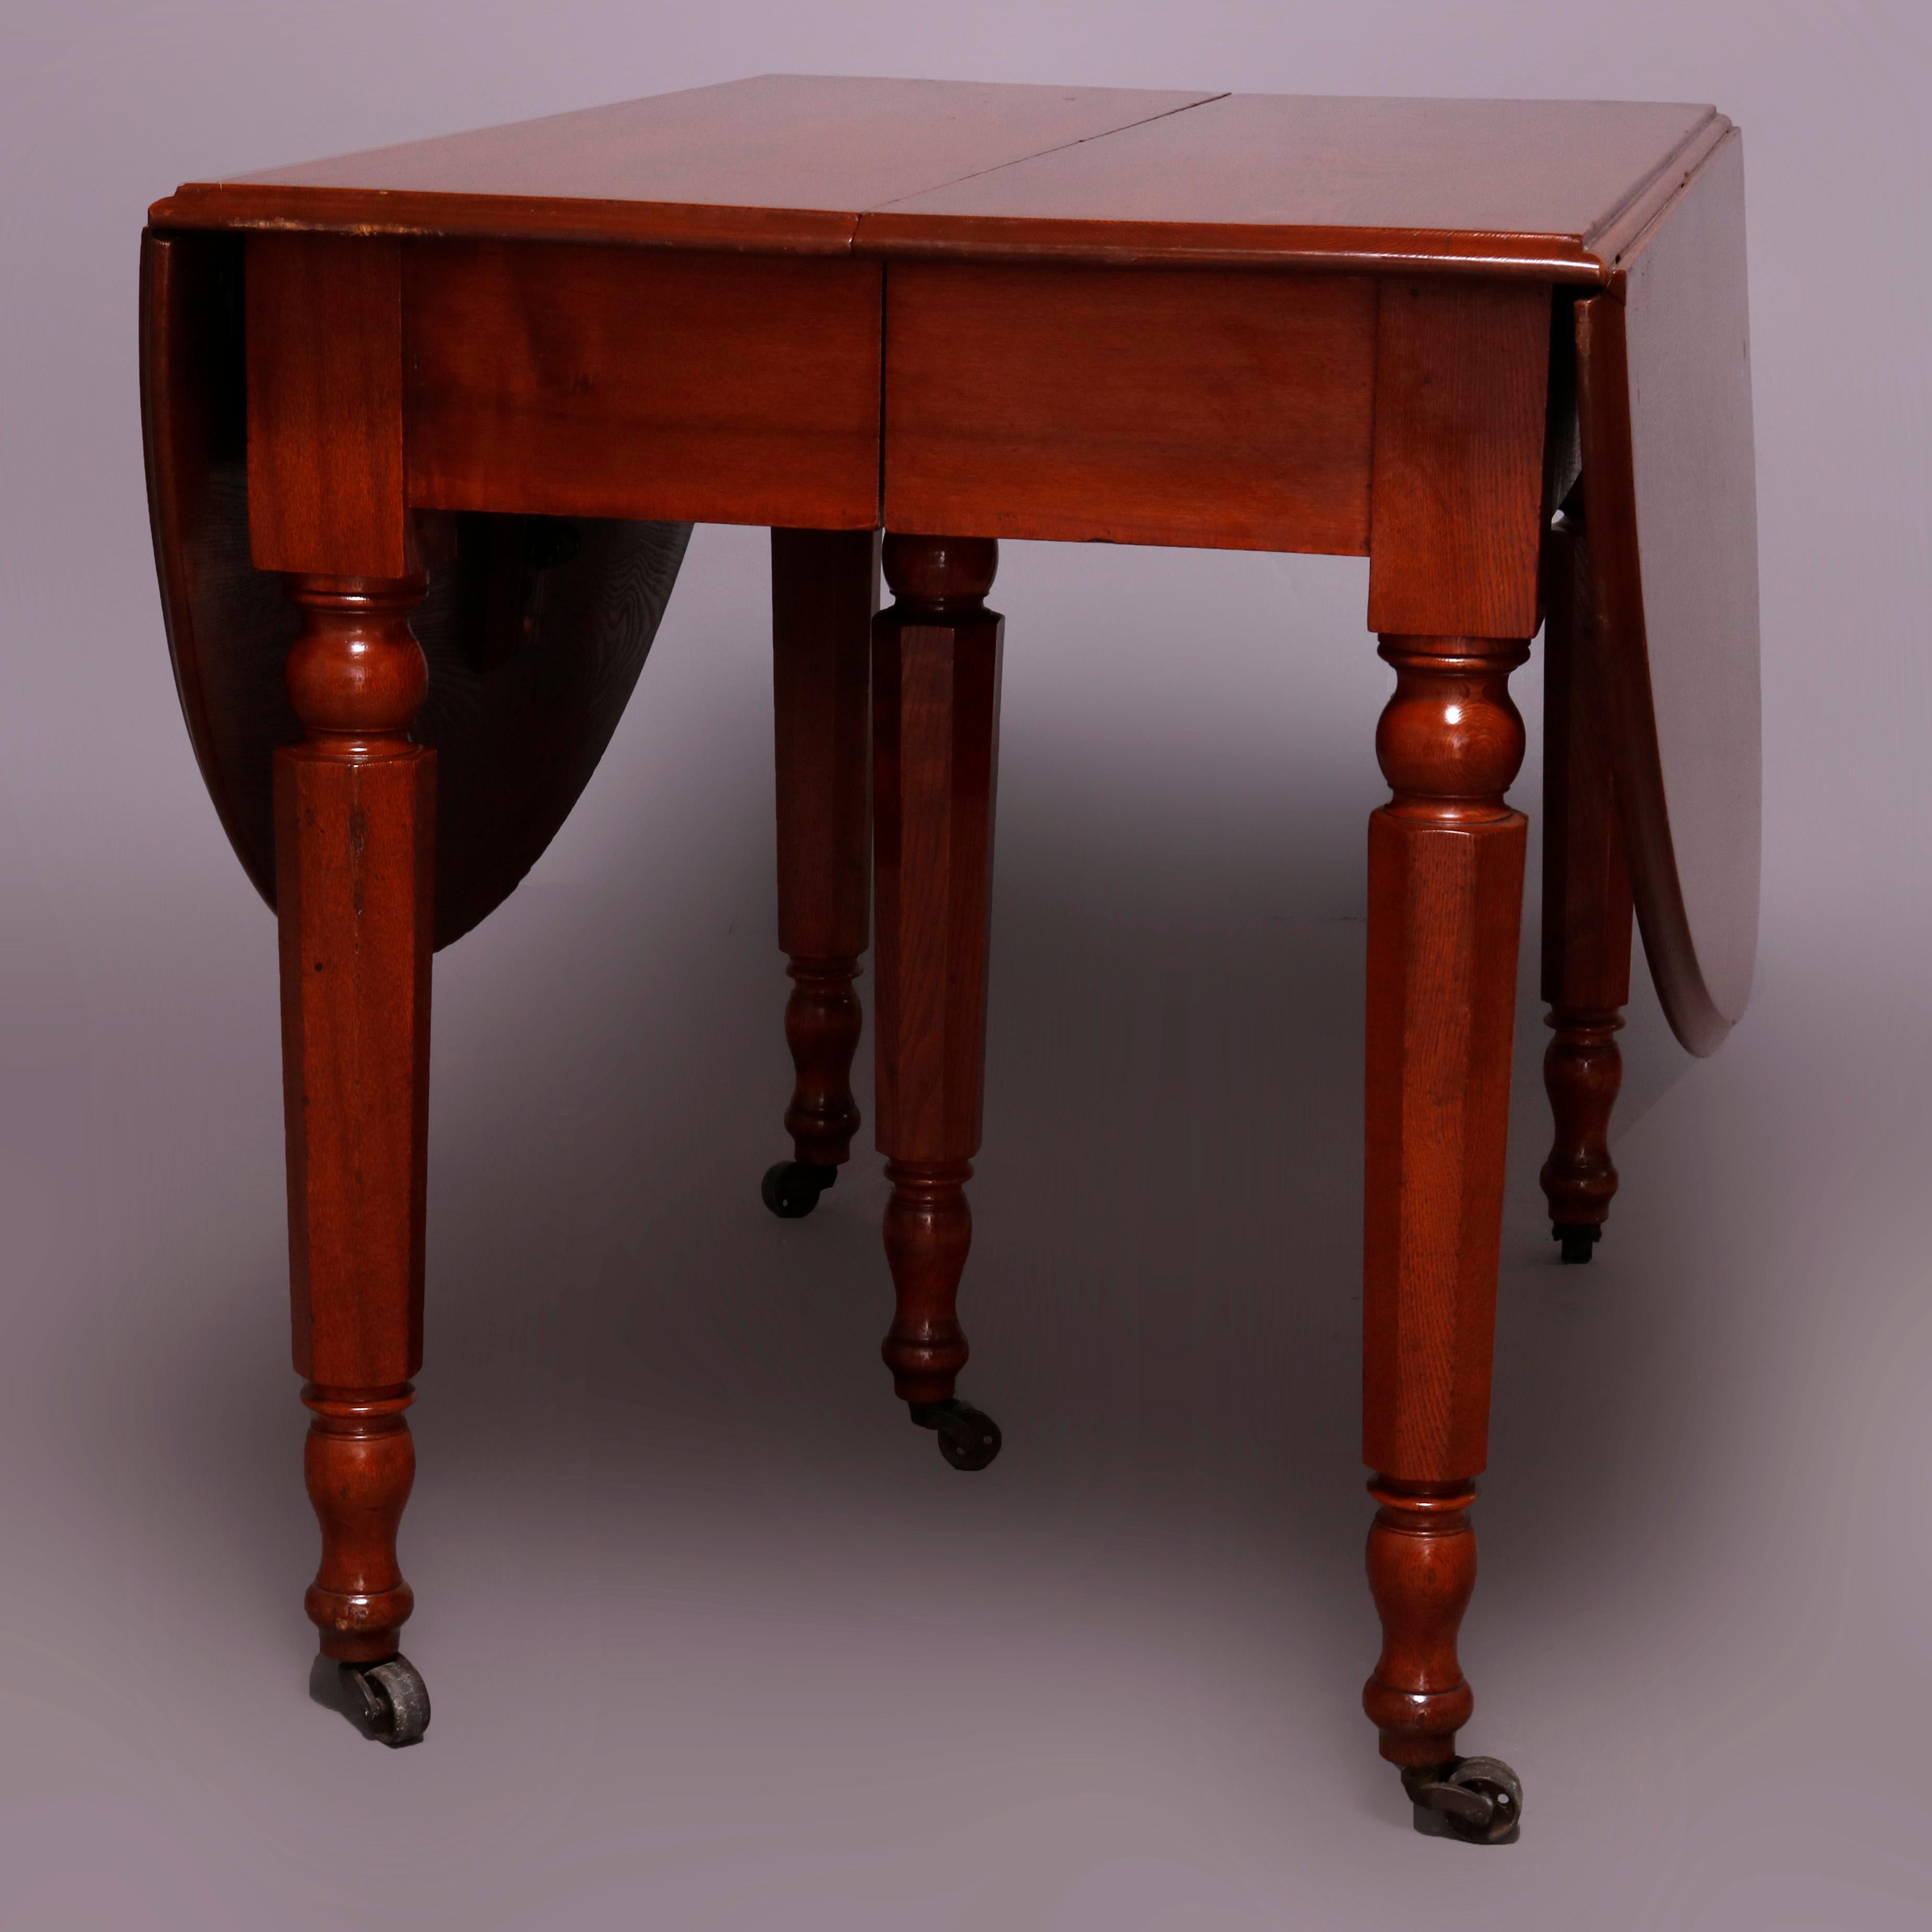 Sheraton Chestnut Drop Leaf Banquet Dining Table with 5 Leaves, circa 1910 8